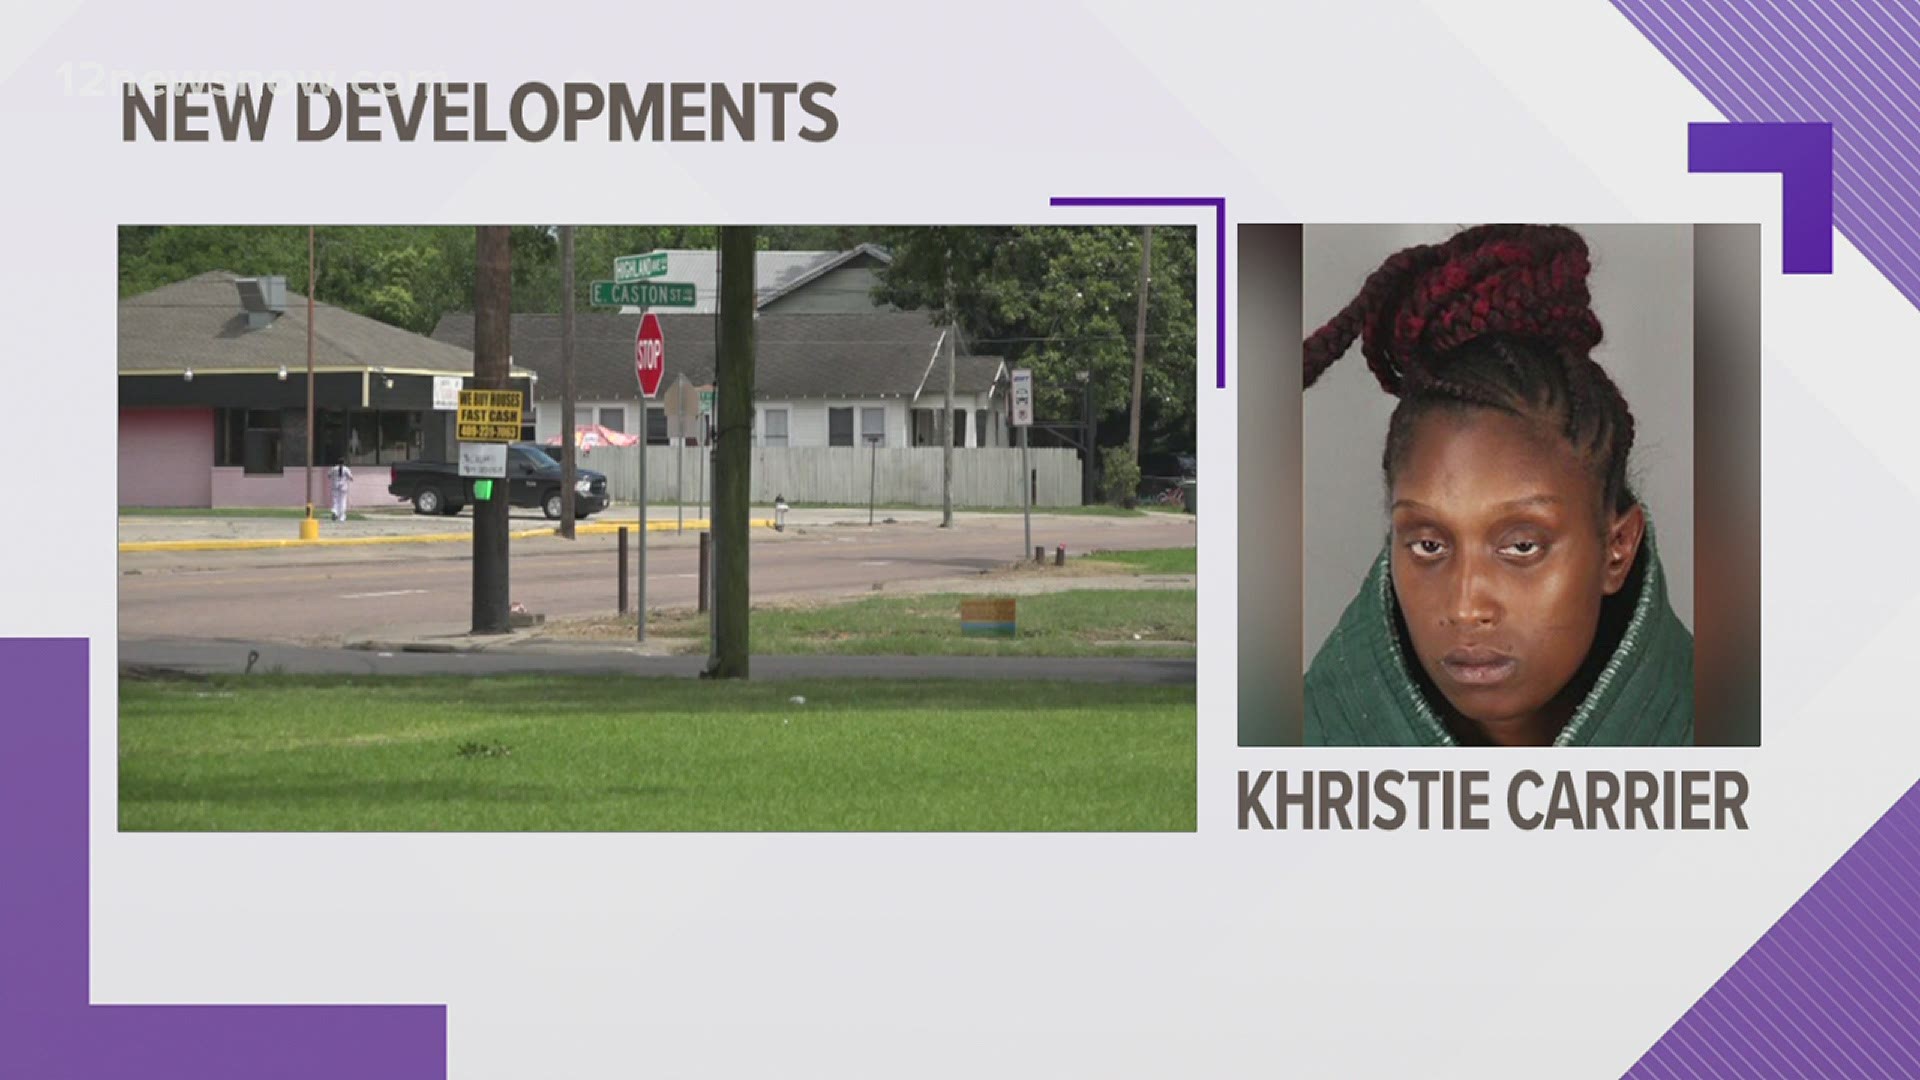 Khristie Carrier was one of dozens arrested in connection with the food stamp fraud case connected to Coleman's Burger Deli